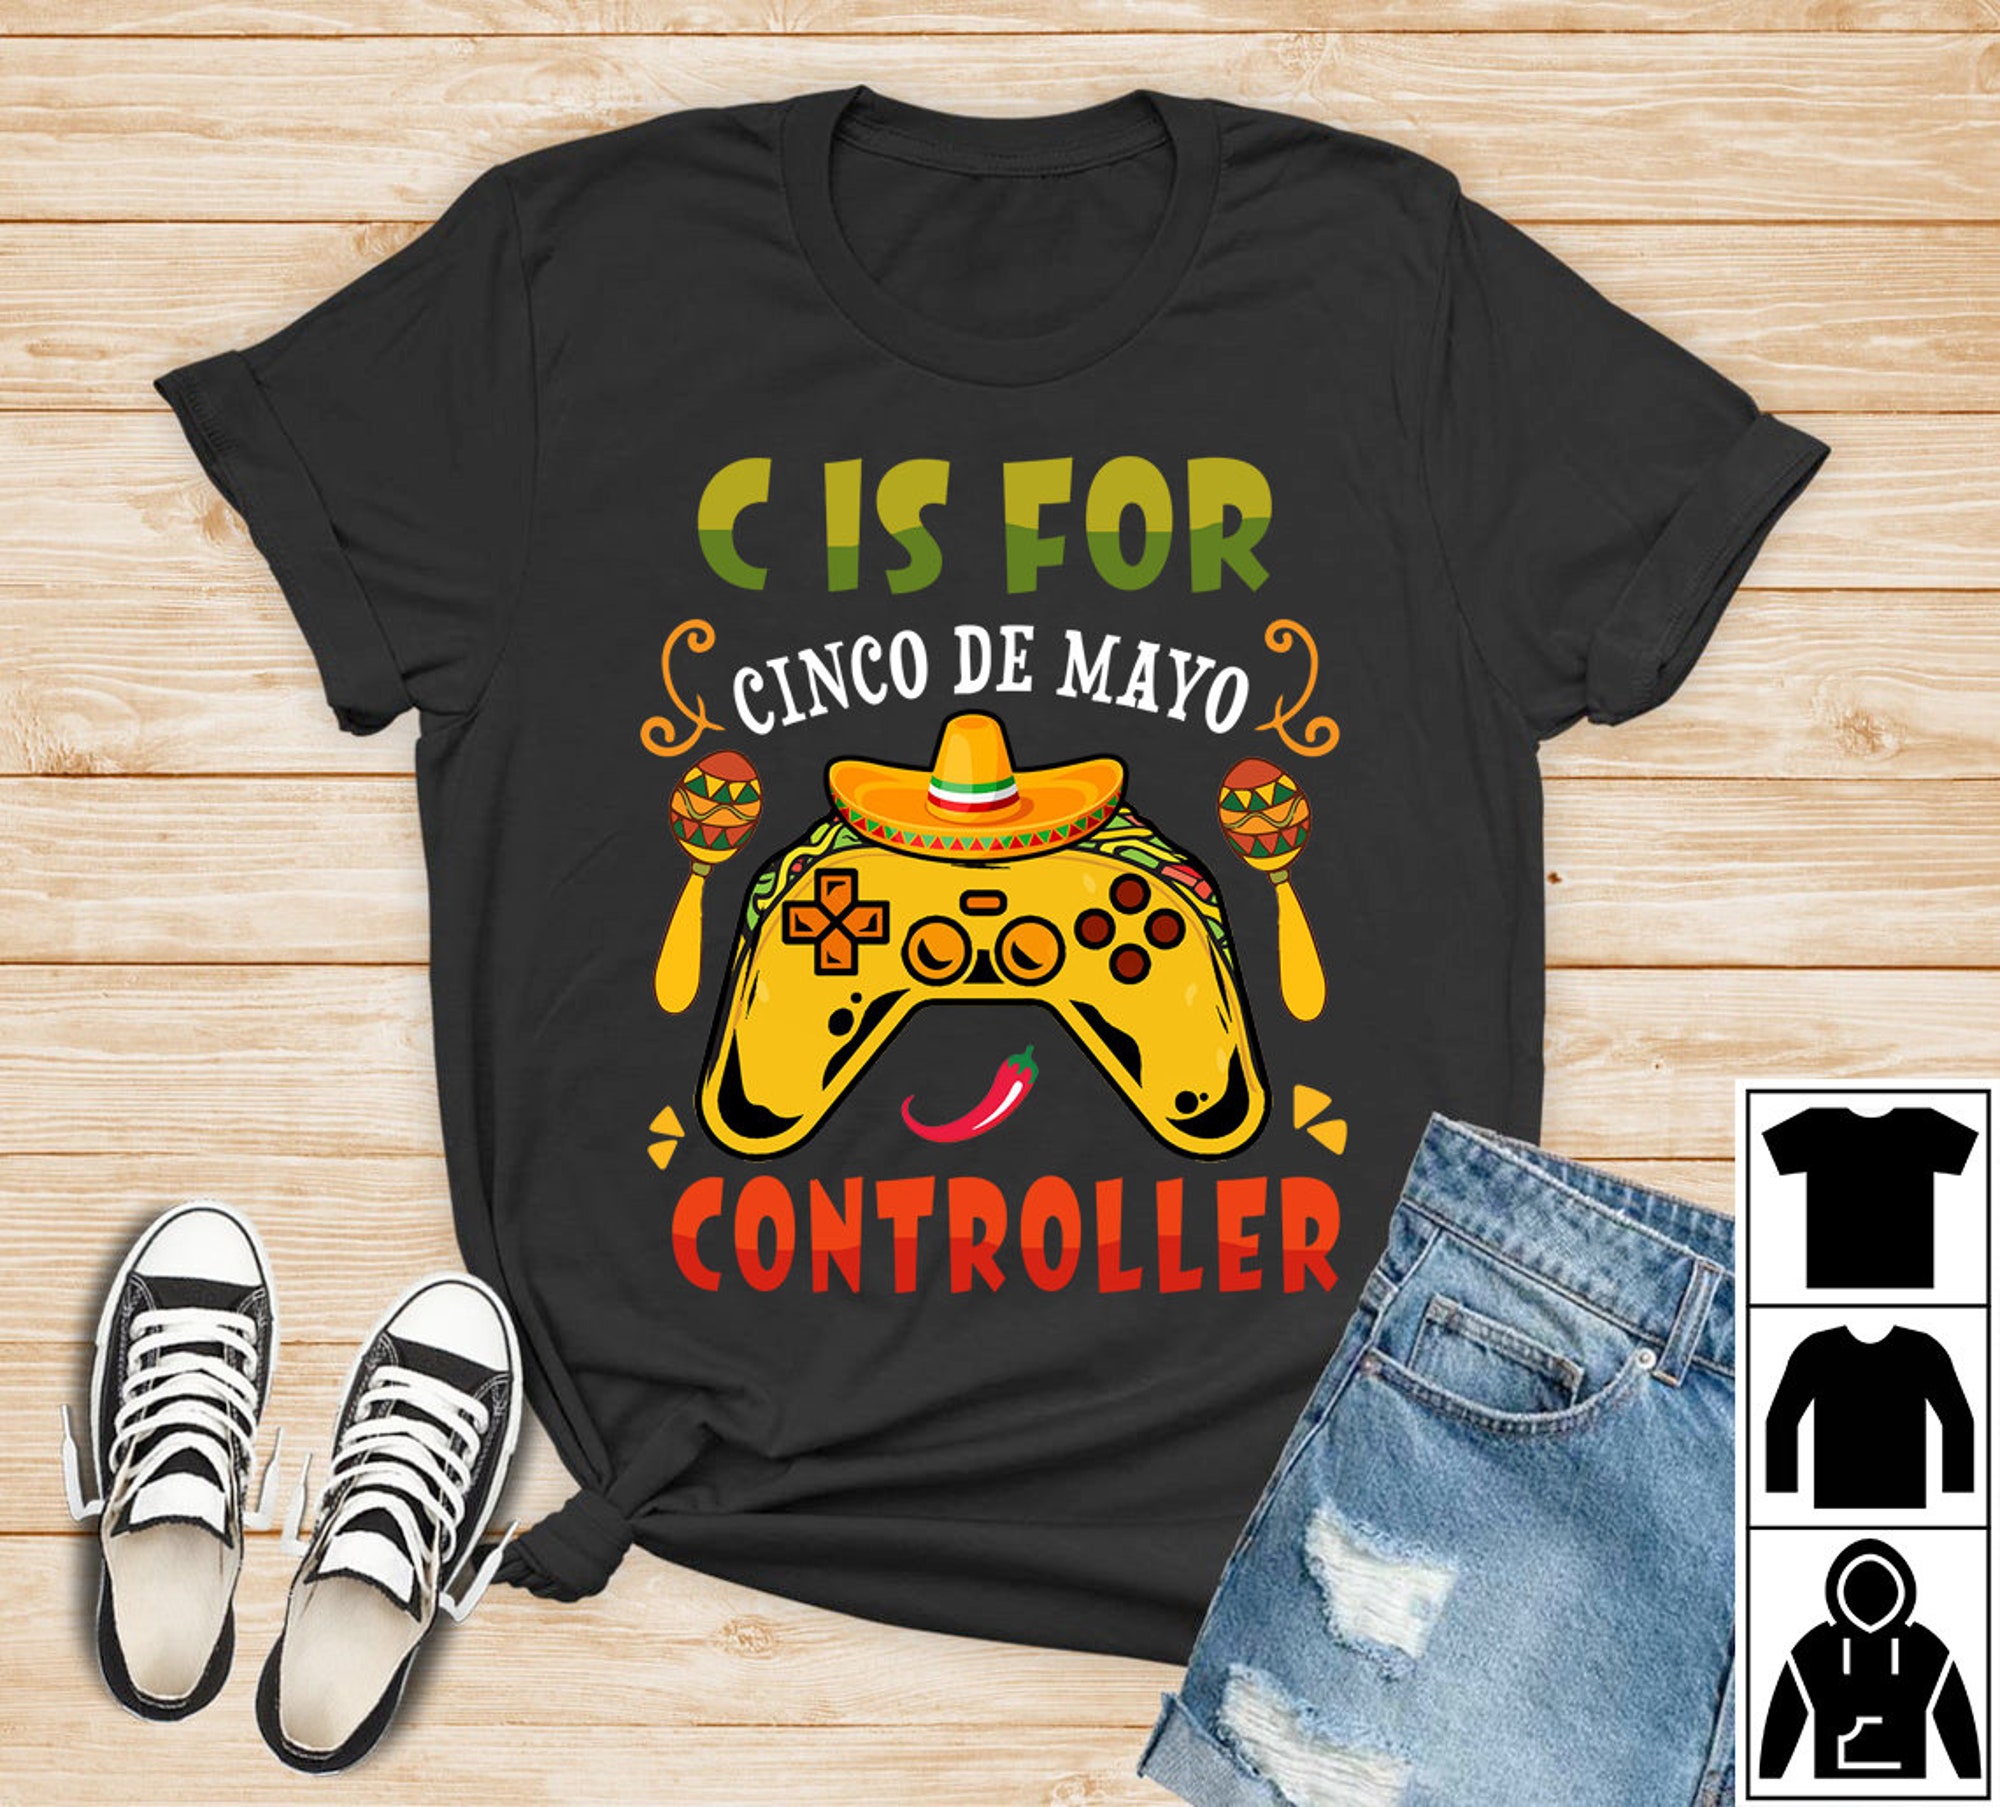 C is For Cinco De Mayo Controller Shirt, Funny Video Game T-Shirt